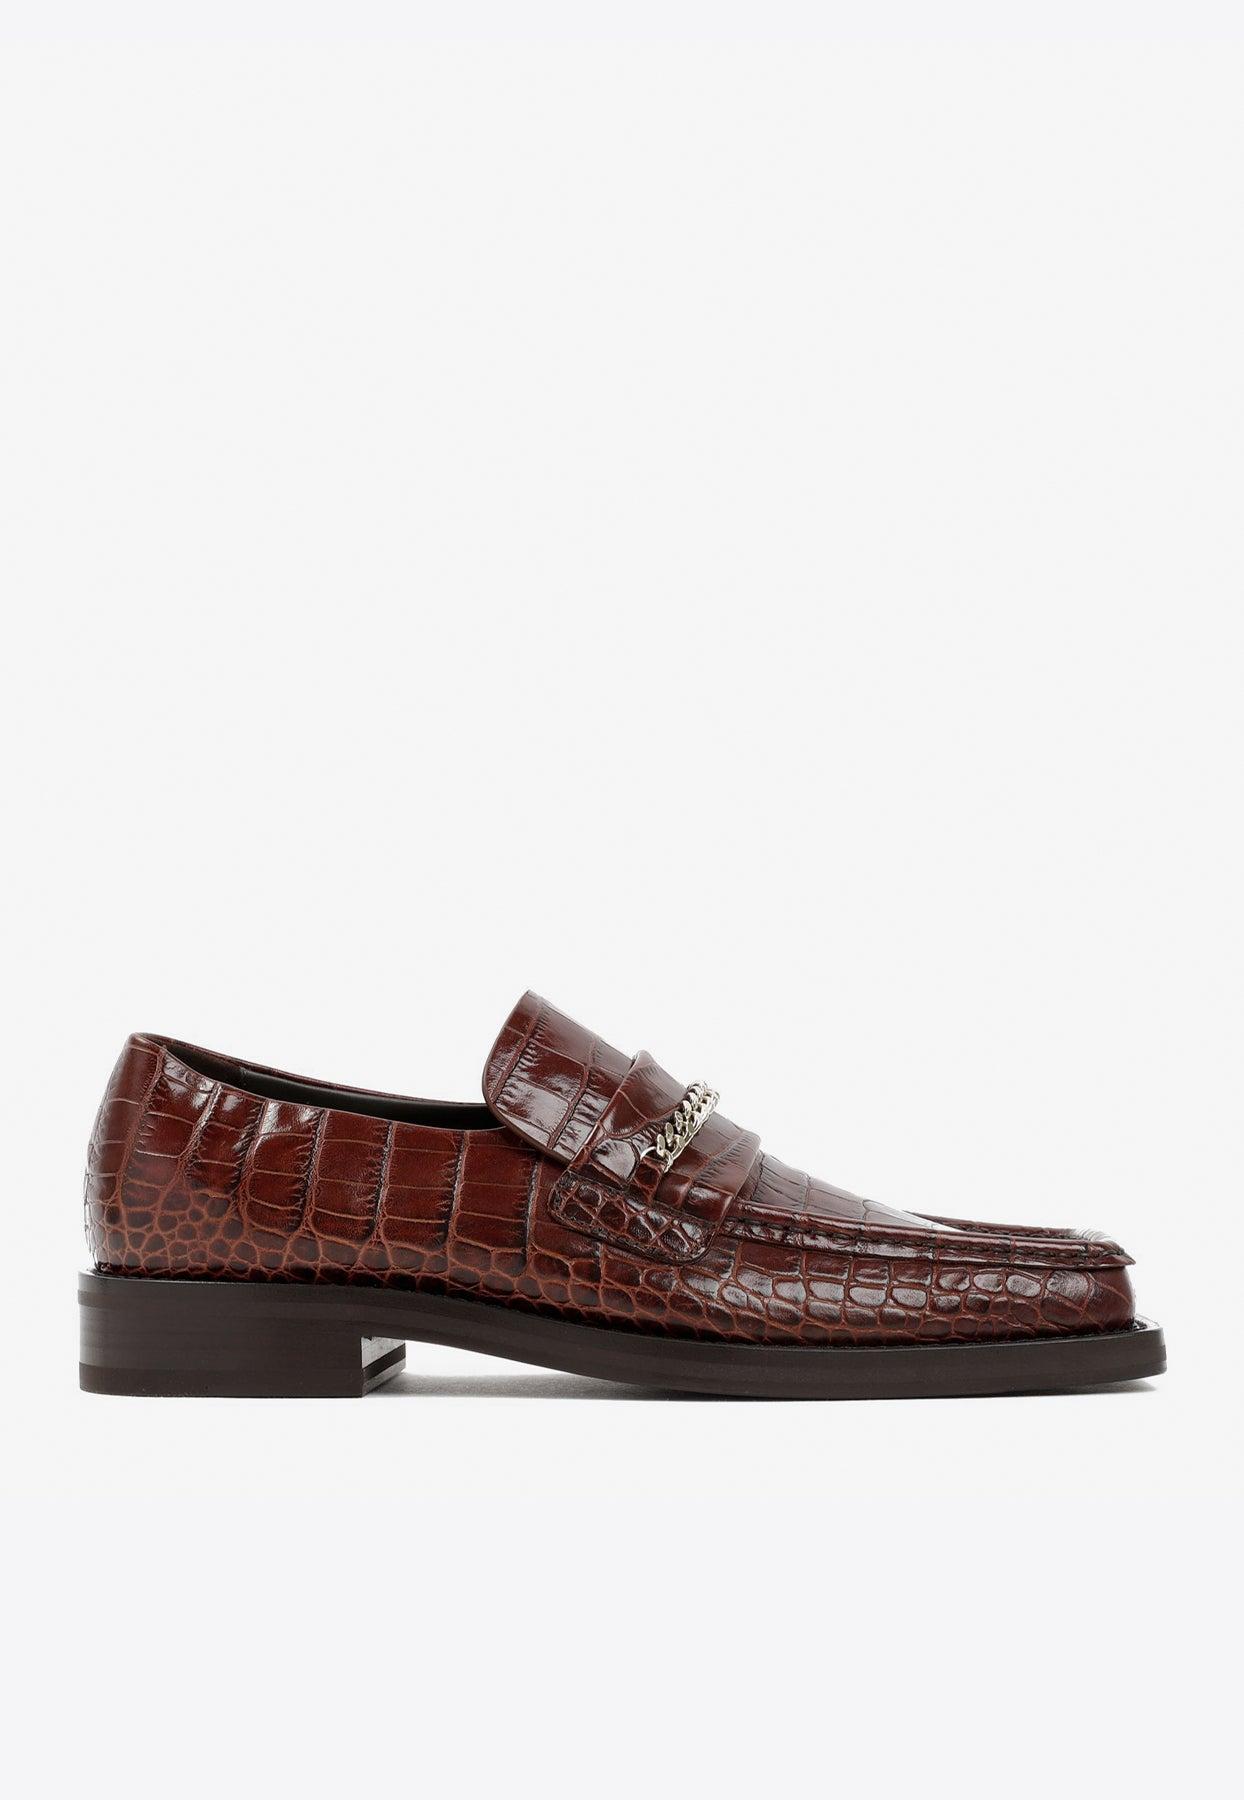 Martine Rose Chain-link Loafers In Croc Embossed Leather in Brown for ...